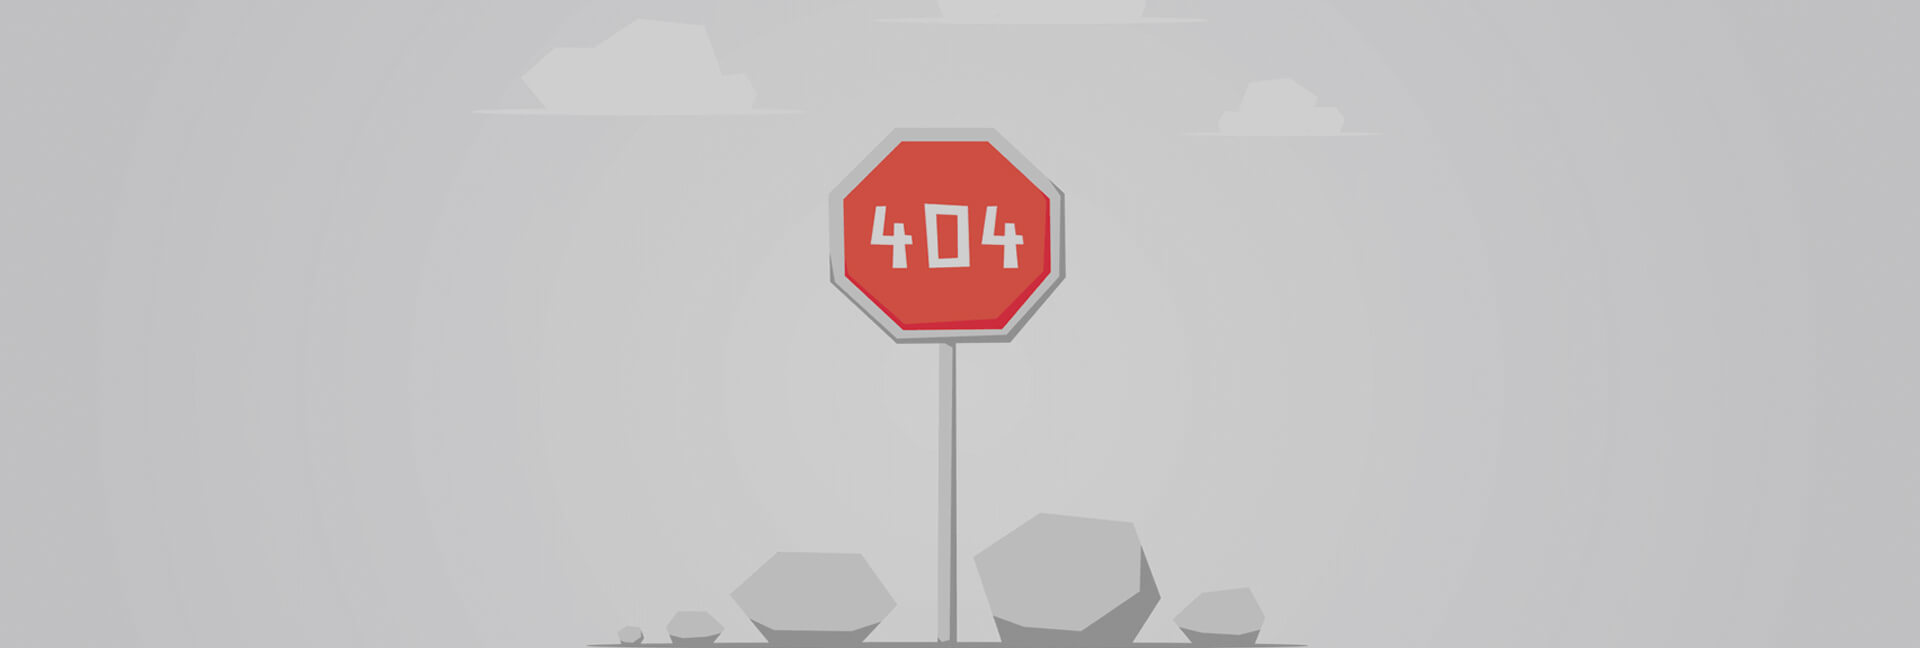 404 on stop sign board